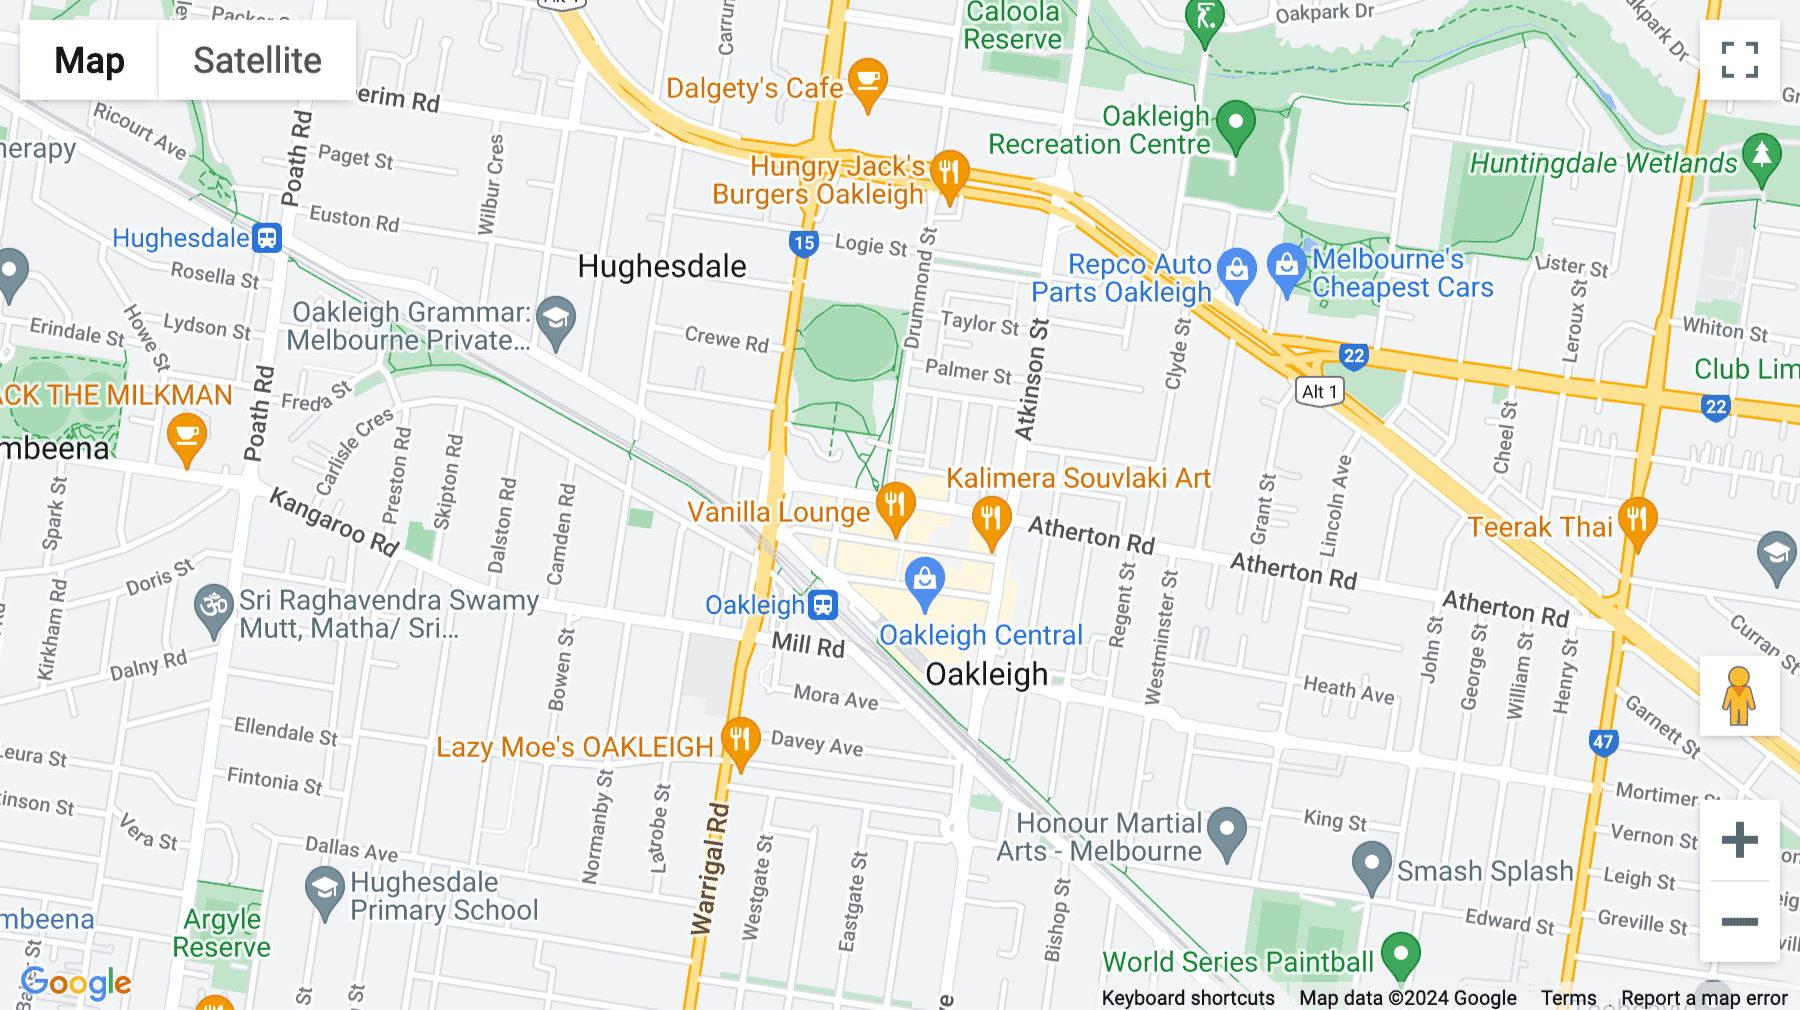 Click for interative map of 2 Eaton Mall, Level 1, Oakleigh, Melbourne